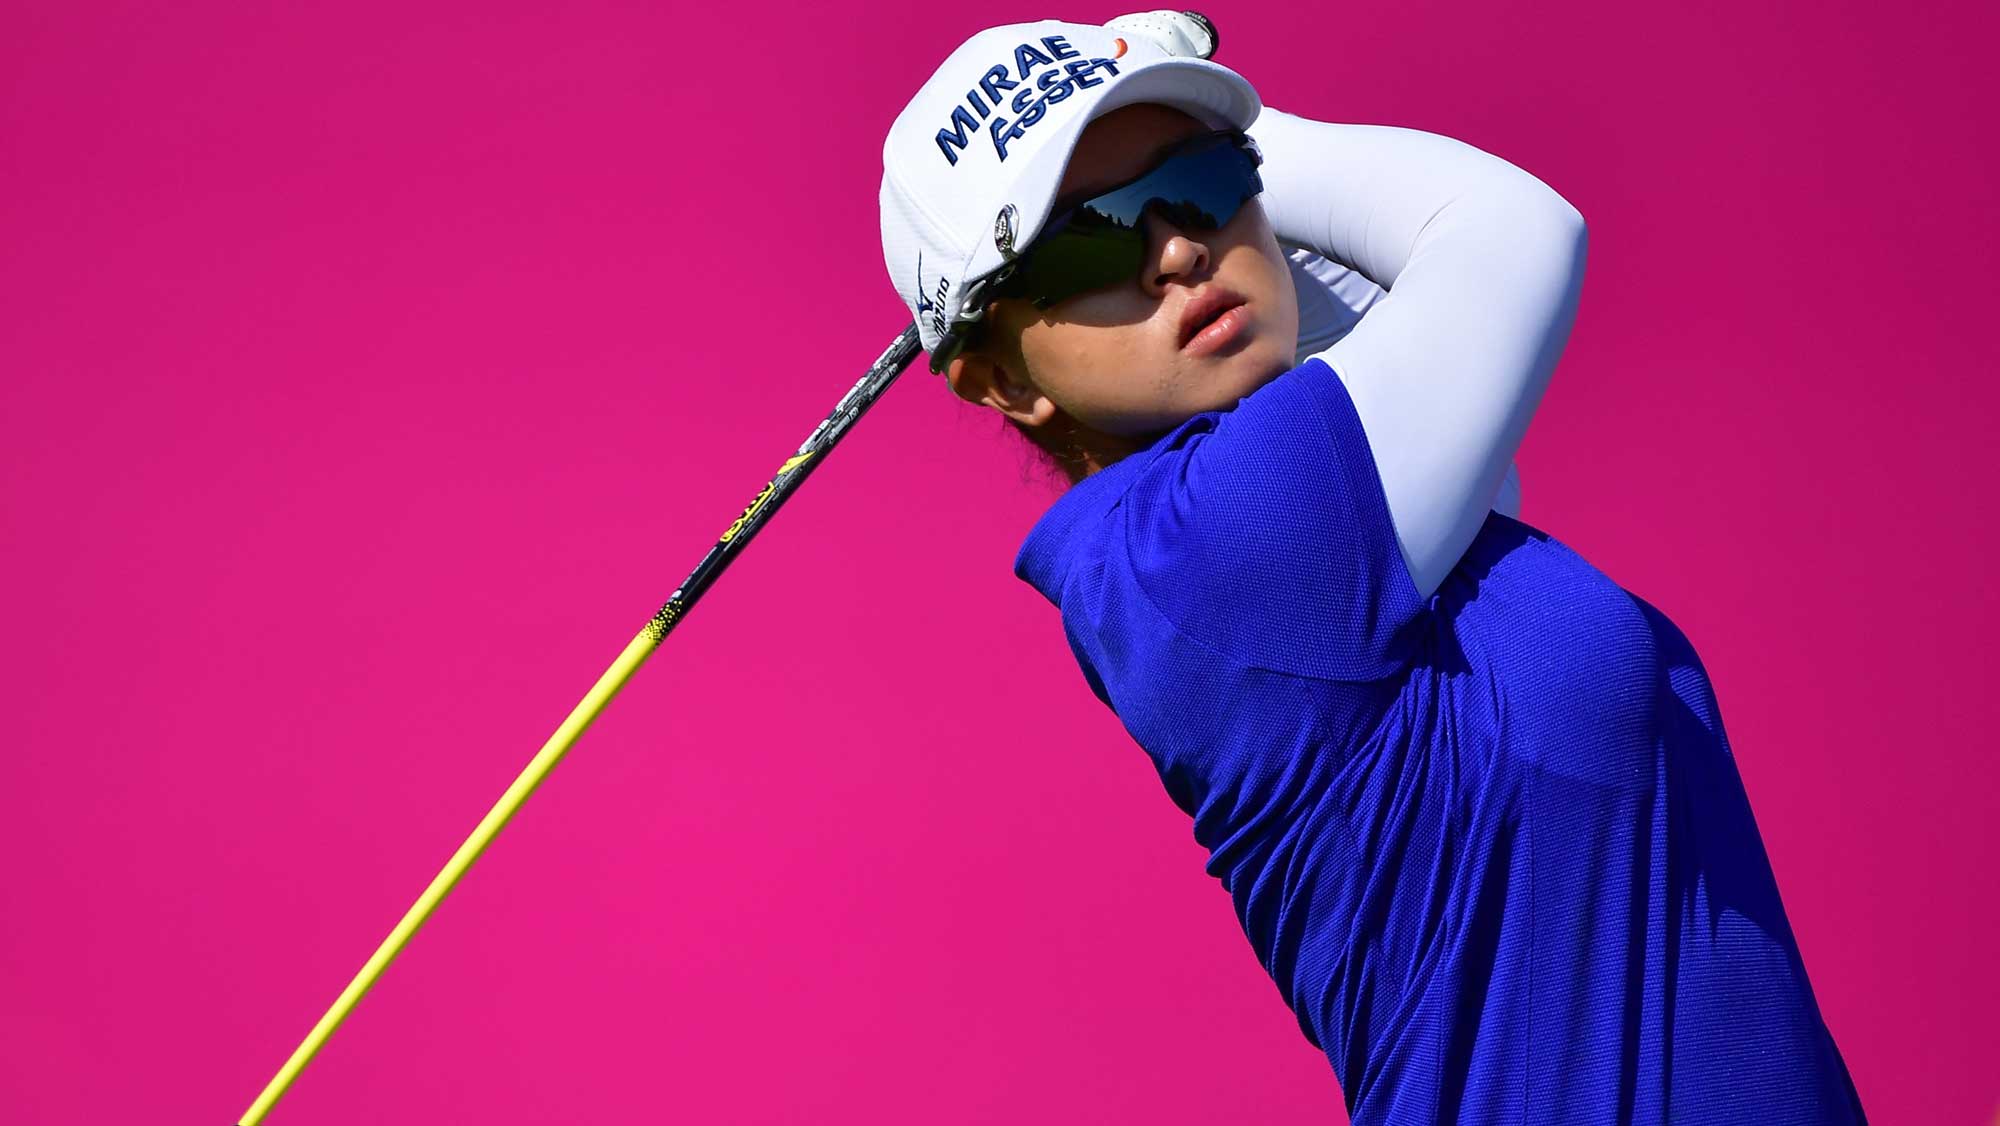  Sei Young Kim of Korea plays a shot during the third round of The Evian Championship